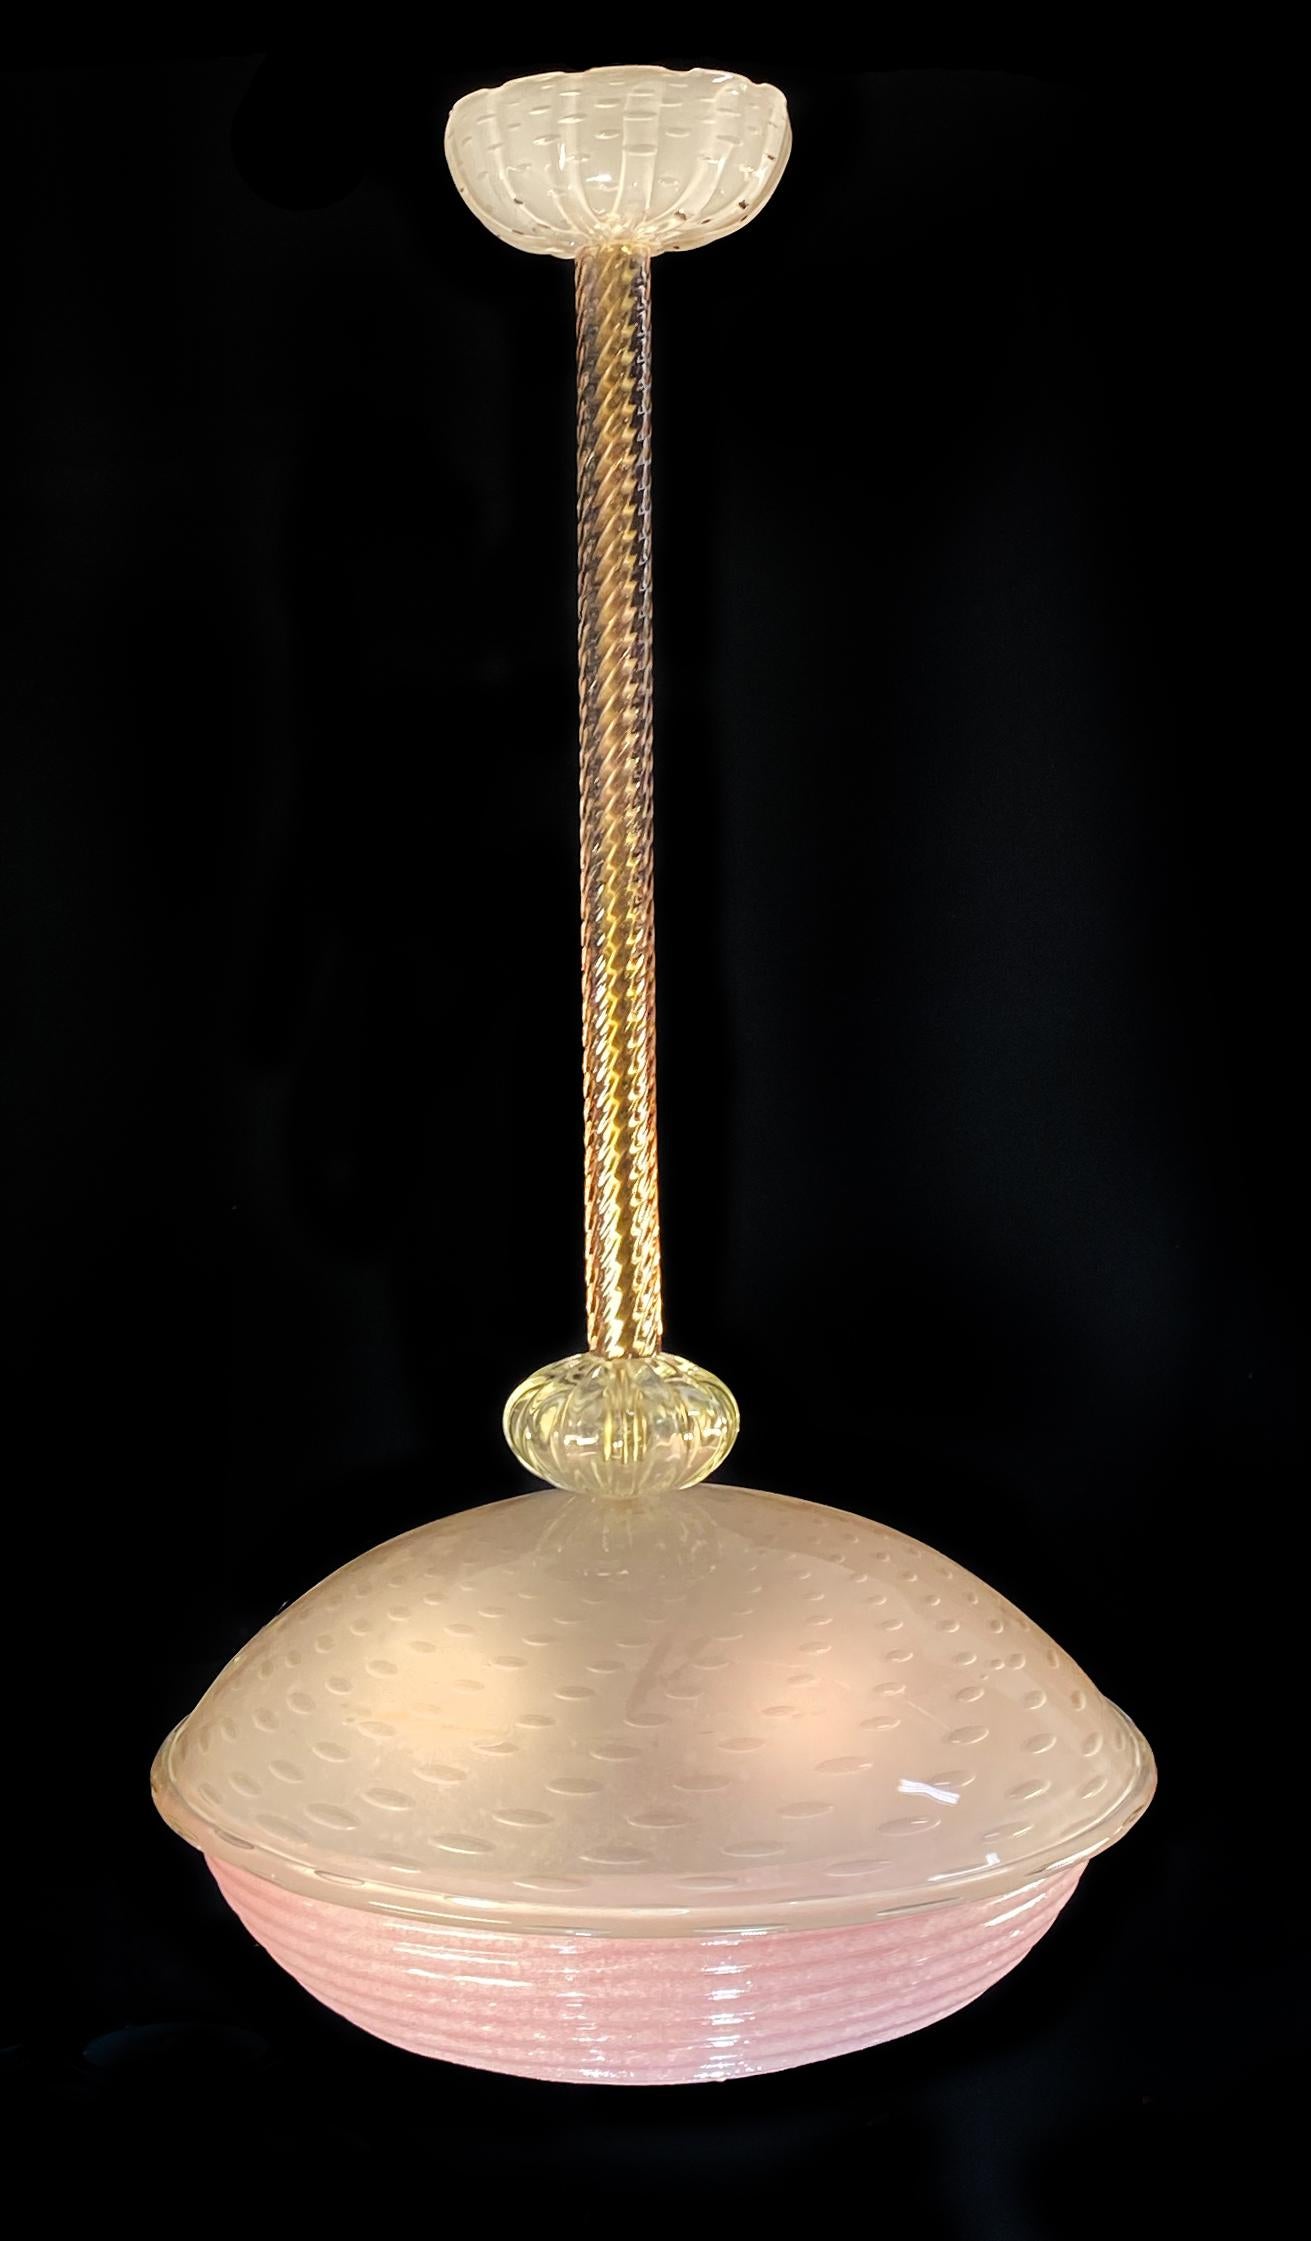 Charming Pink Glass Lantern Chandelier by Barovier & Toso, Murano, 1940 For Sale 3